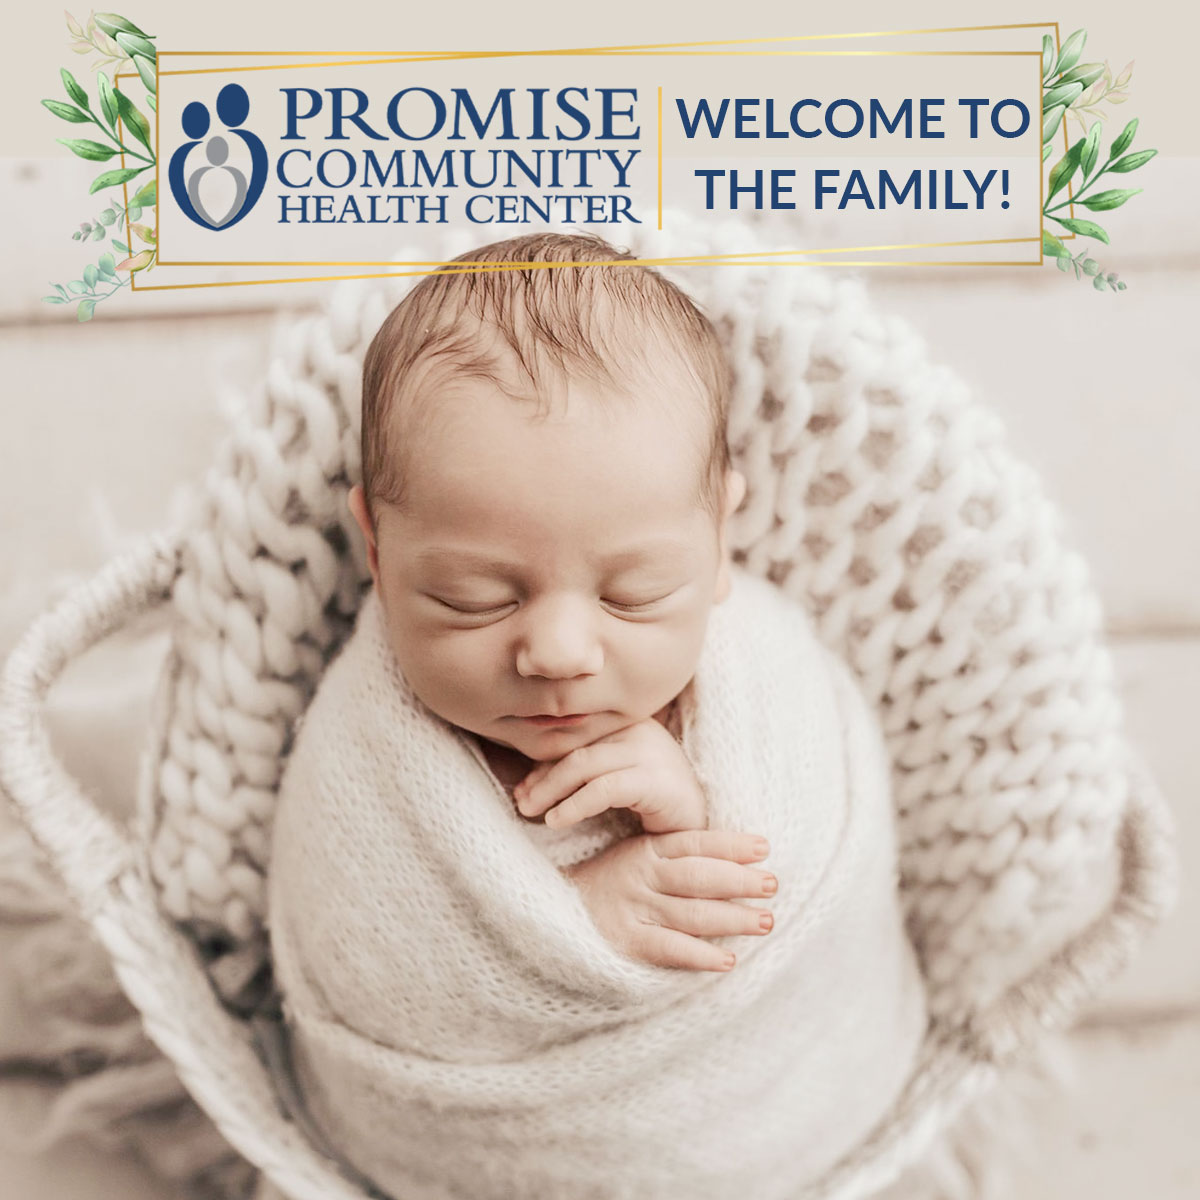 Koupal Family | Promise Community Health Center in Sioux Center, Iowa | Home births in northwest Iowa, Home births in southeast South Dakota, Home births in southwest Minnesota | Home births in Sioux Falls South Dakota, Home births in Beresford South Dakota, Home births in Sioux City IA, Home births in LeMars IA, Home births in Worthington MN, Home births in Iowa, Home births in South Dakota, Home births in Minnesota